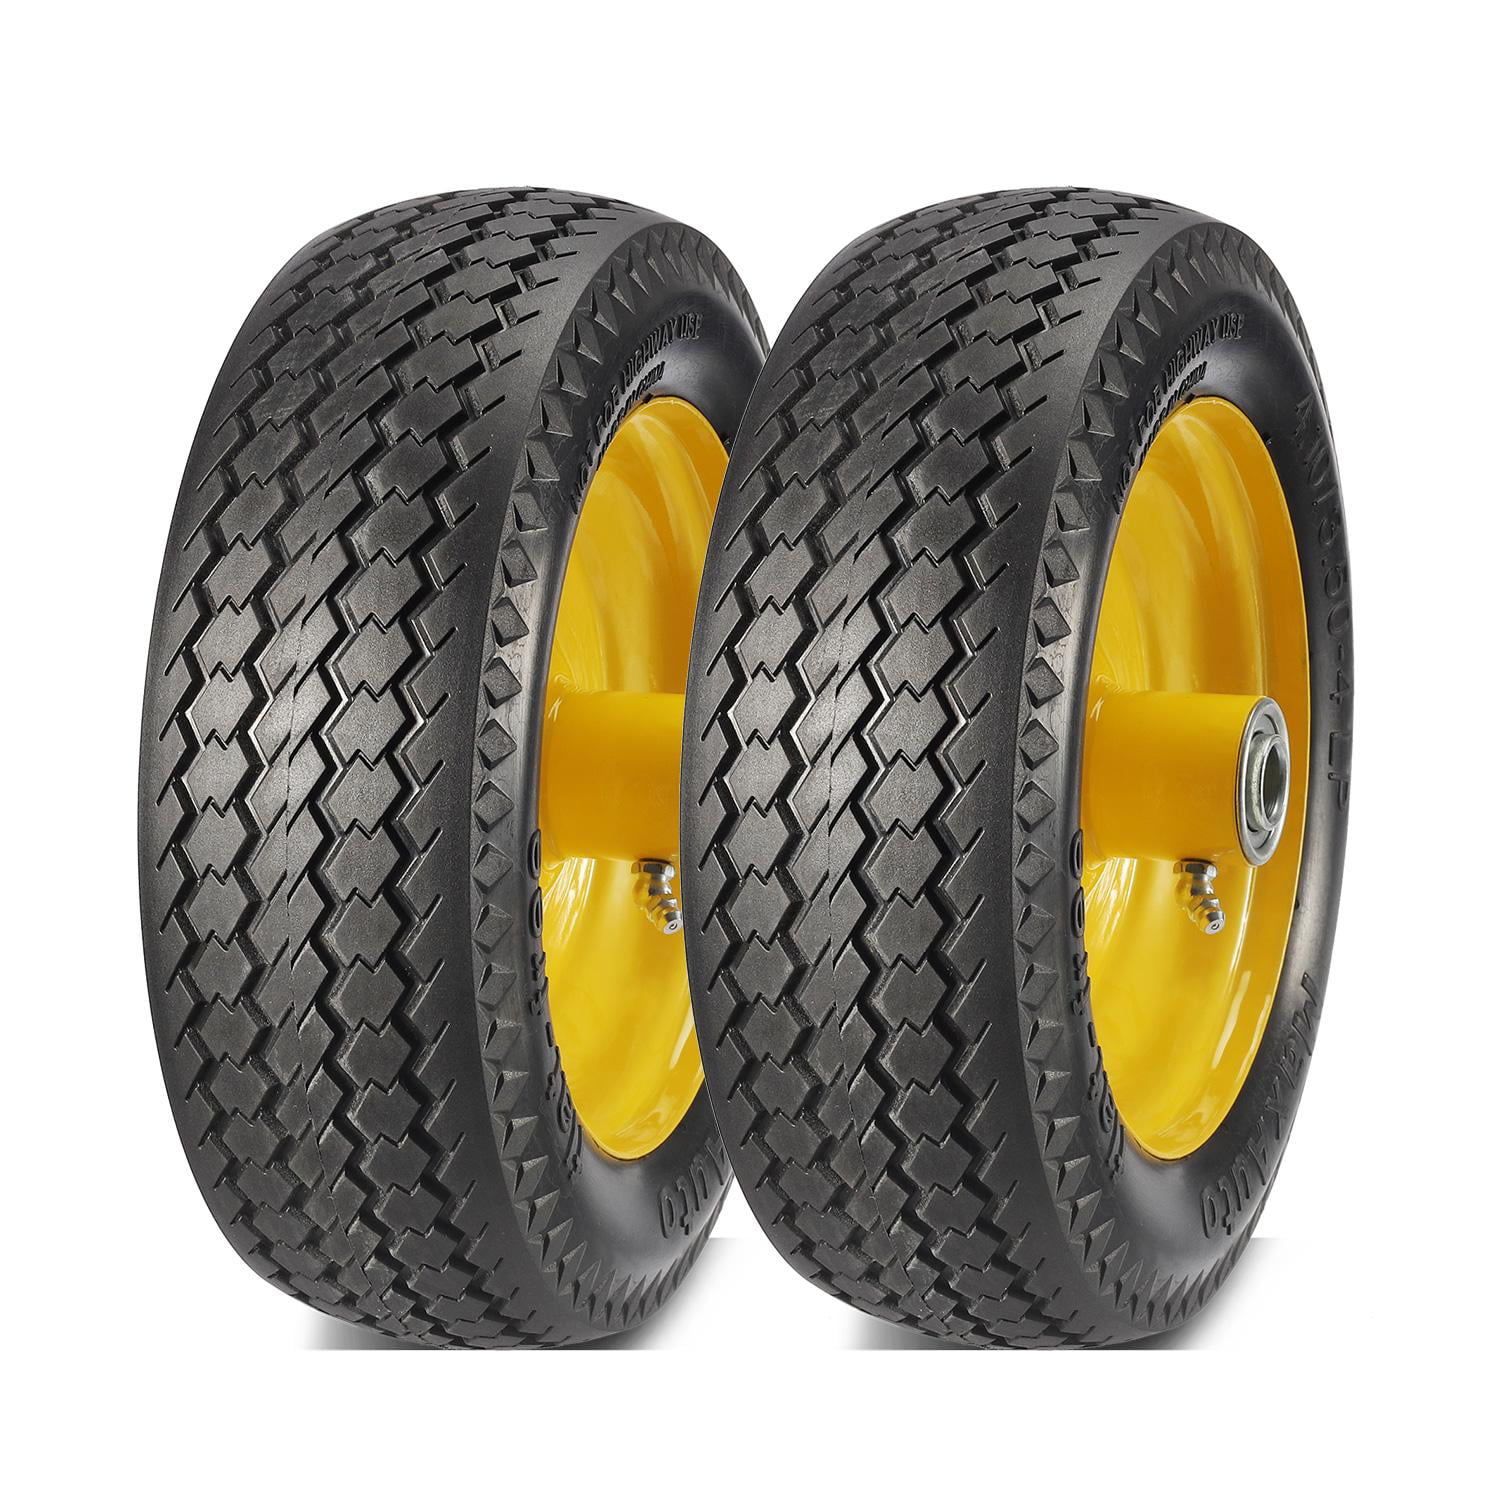 SLT 4.10/3.50-4LP Flat Free Hand Truck Tire on Wheel Durable Replacement Tire Hand Truck/All Purpose Utility Tire on Wheel 